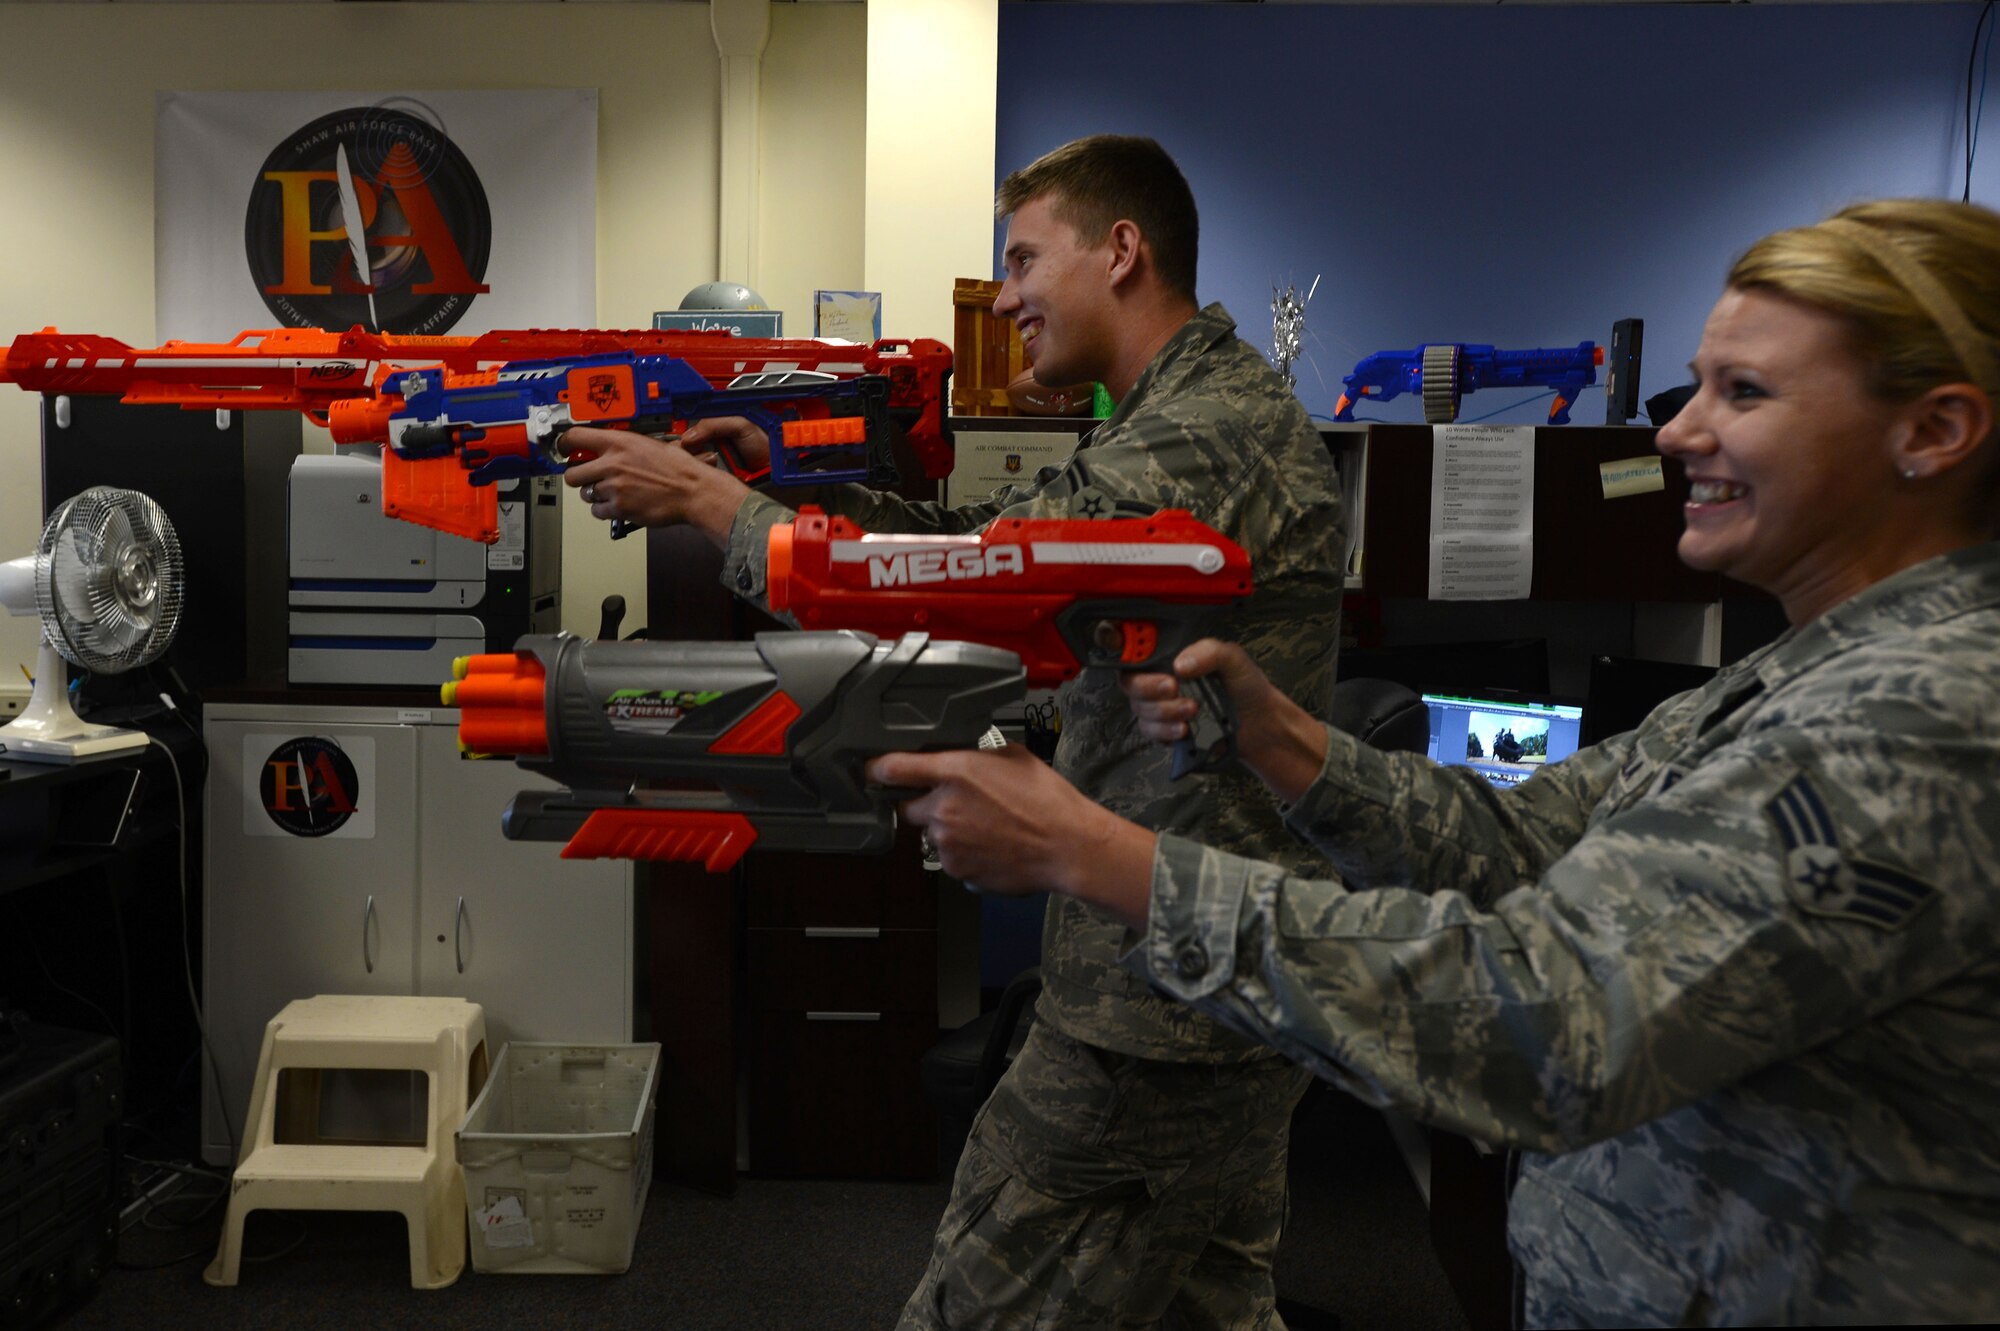 U.S. Air Force Senior Airman Tabatha Zarrella and Airman 1st Class Michael Cossaboom, 20th Fighter Wing Public Affairs photojournalists, participate in an office NERF battle Nov. 7, 2014, at Shaw Air Force Base, S.C. Maintaining the social pillar of Comprehensive Airman Fitness while in a work setting ensures personal and professional success and resiliency of the Airmen in the public affairs office. CAF’s pillars of fitness include mental, physical, social, and spiritual. (U.S. Air Force photo by Airman 1st Class Jensen Stidham/Released)
